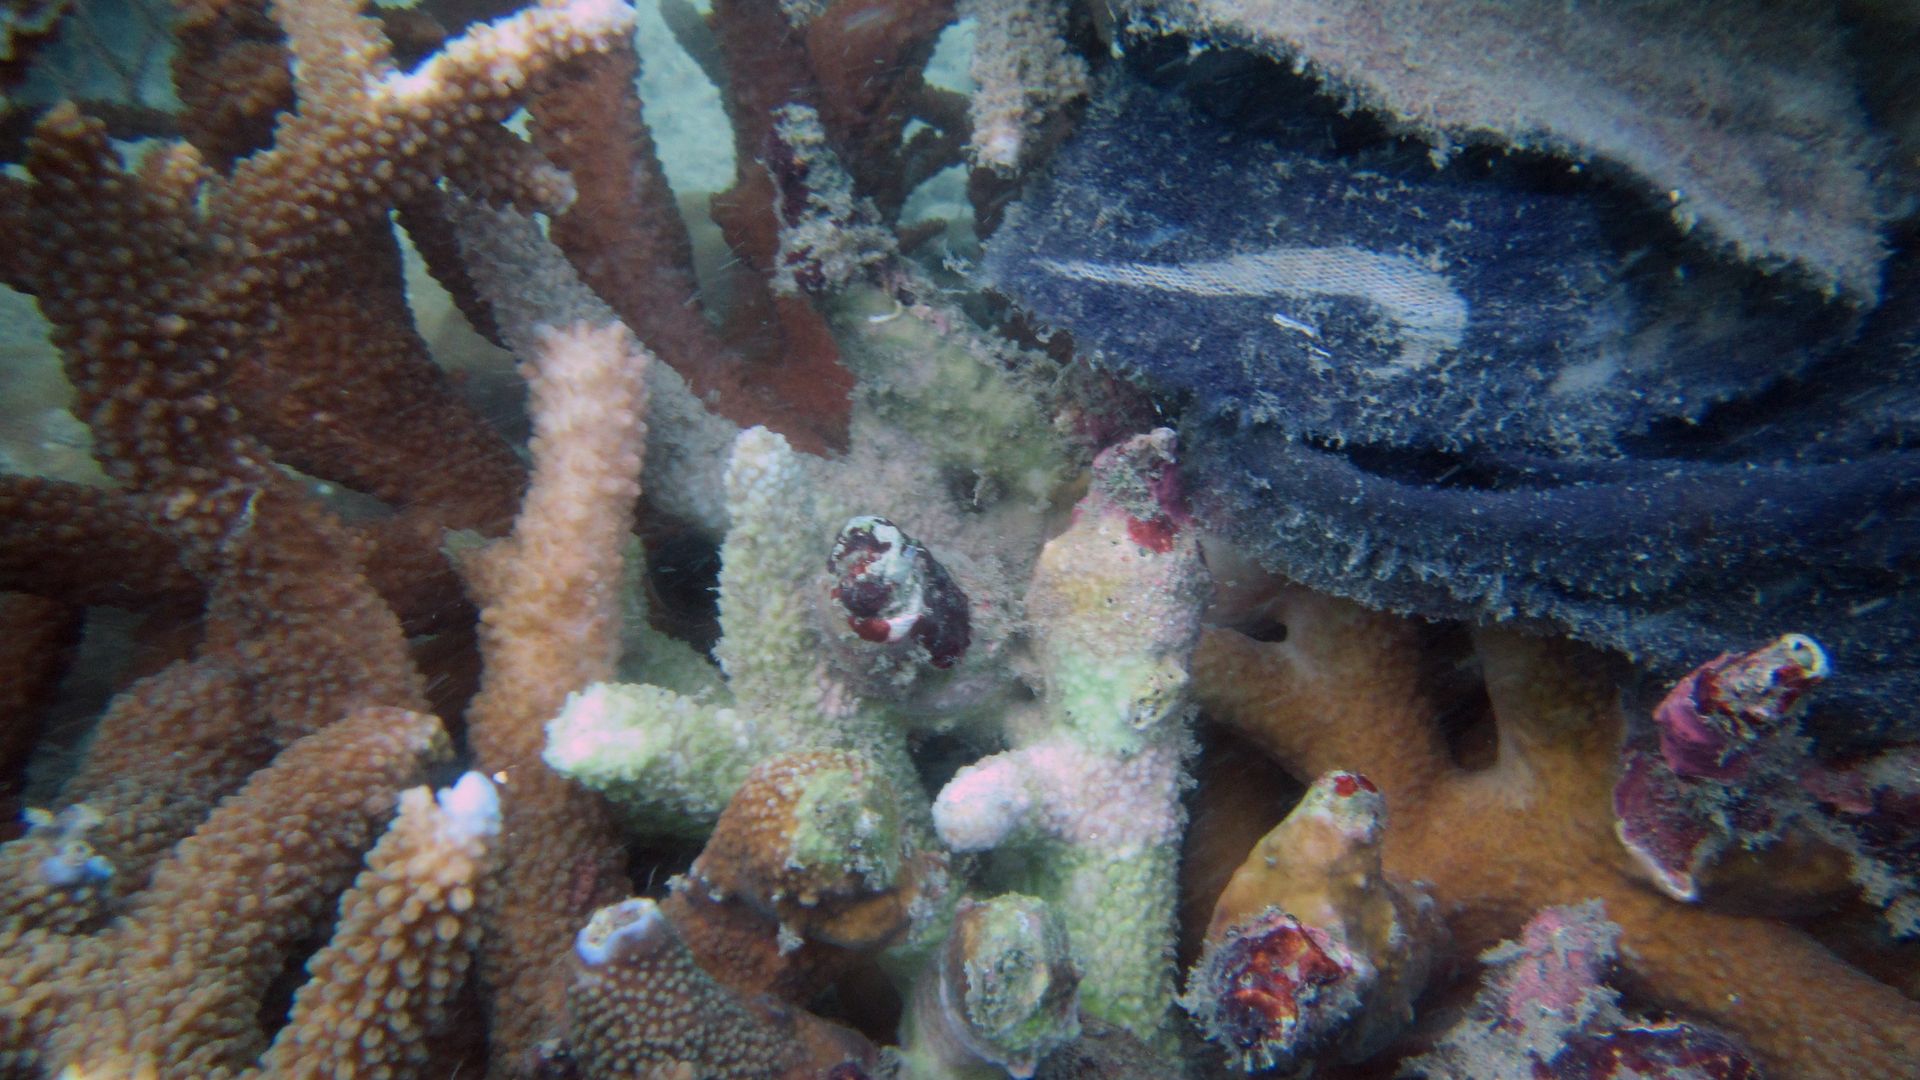 Photo of coral off coast of Indonesia with pollution, including a piece of something with a Nike emblem, causing white syndrome coral disease